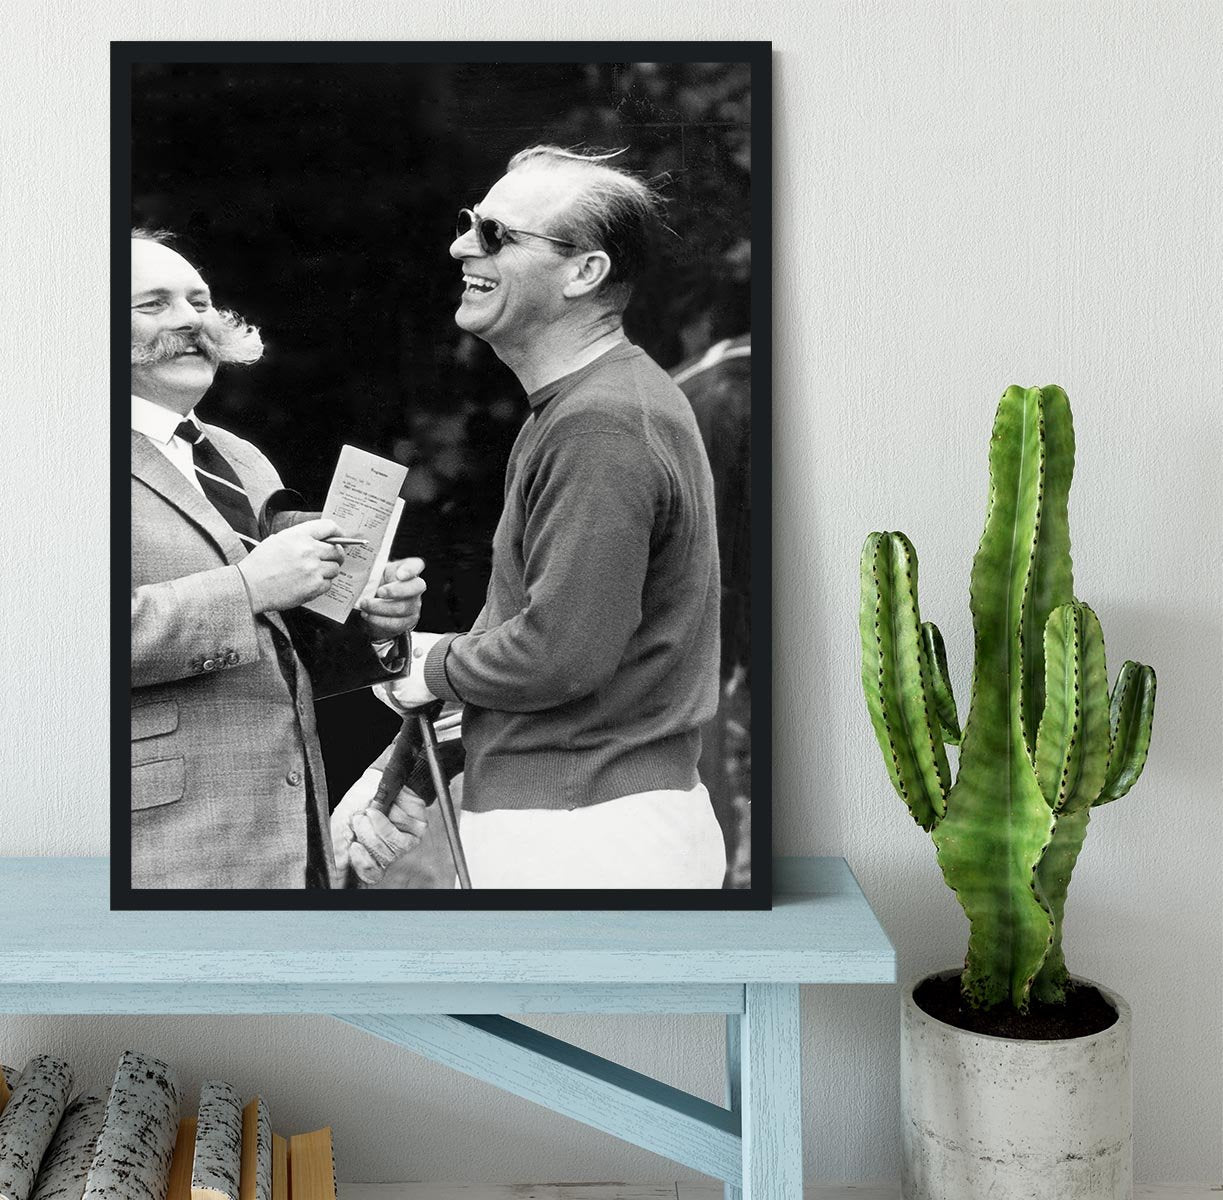 Prince Philip chatting with the comedian Jimmy Edwards Framed Print - Canvas Art Rocks - 2